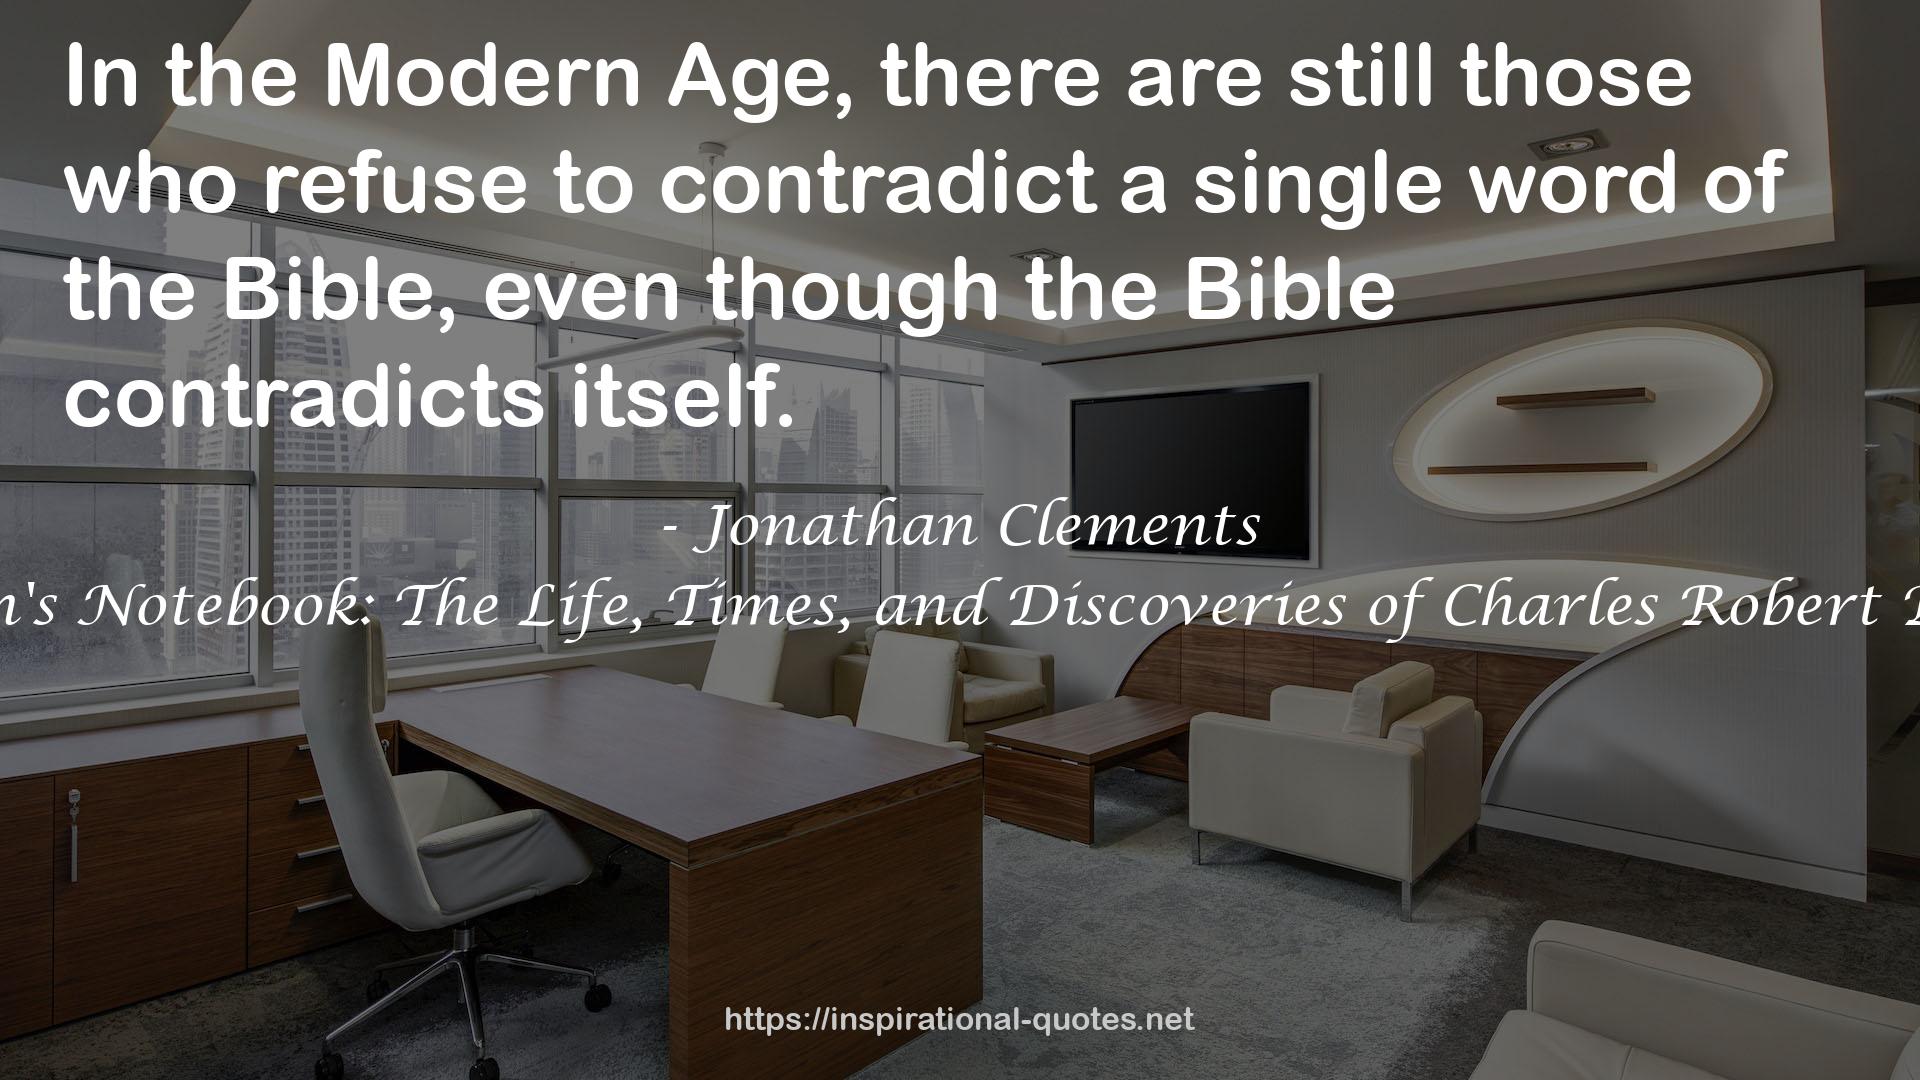 Jonathan Clements QUOTES